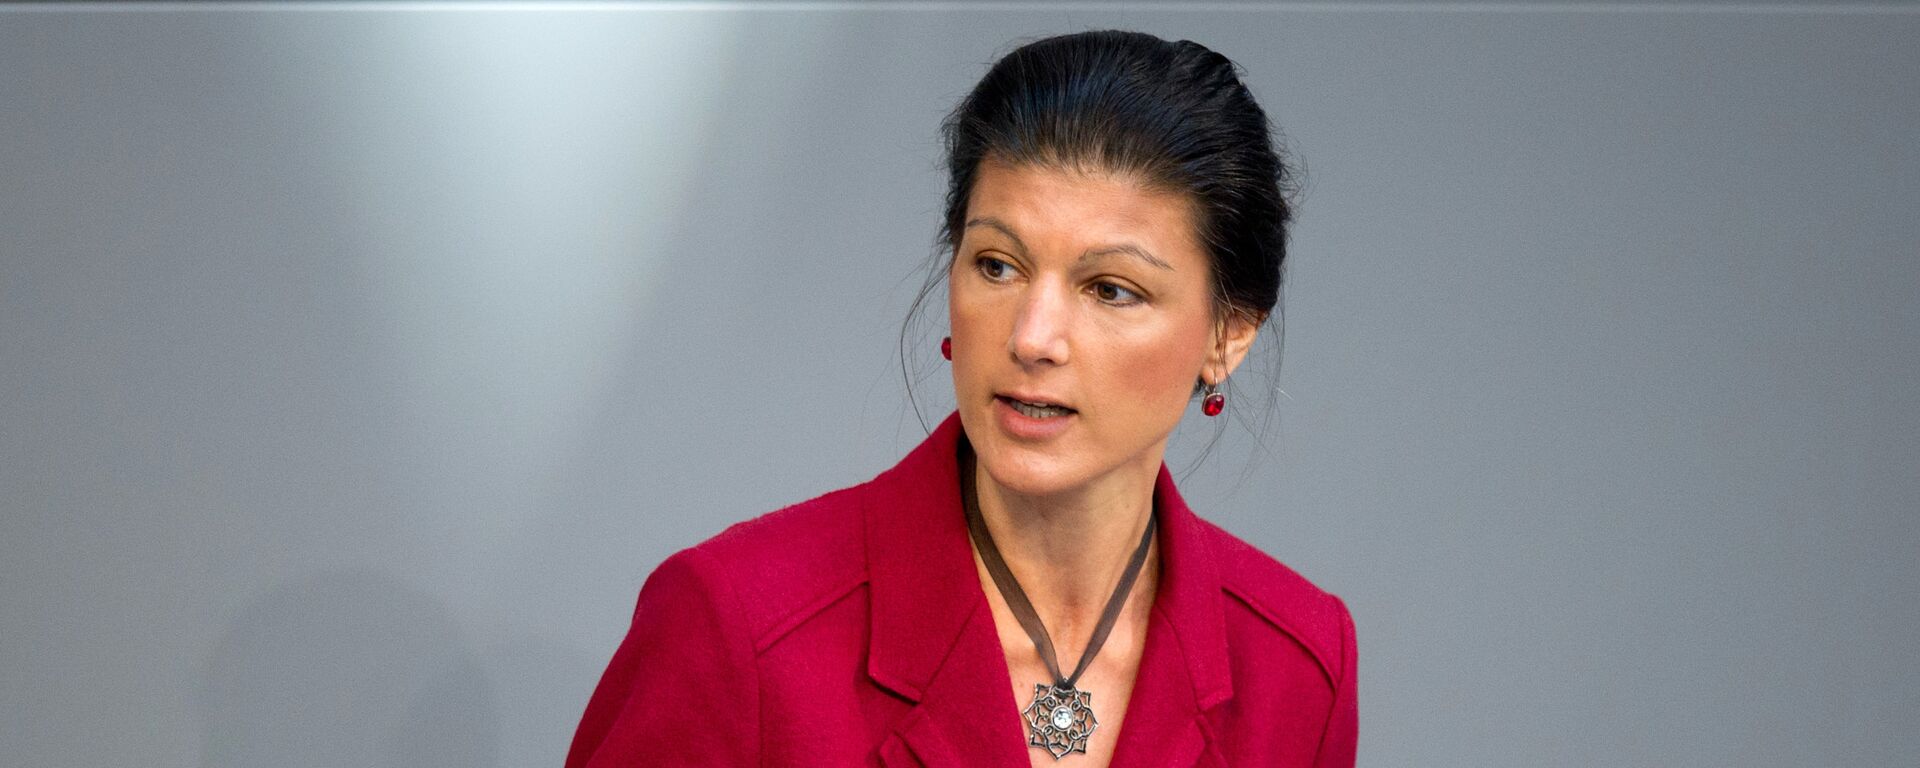 Sahra Wagenknecht of the Left party (Die Linke) delivers her speech at the German parliament on the next EU summit at the German Bundestag in Berlin, on March 19, 2015 - Sputnik International, 1920, 19.03.2024